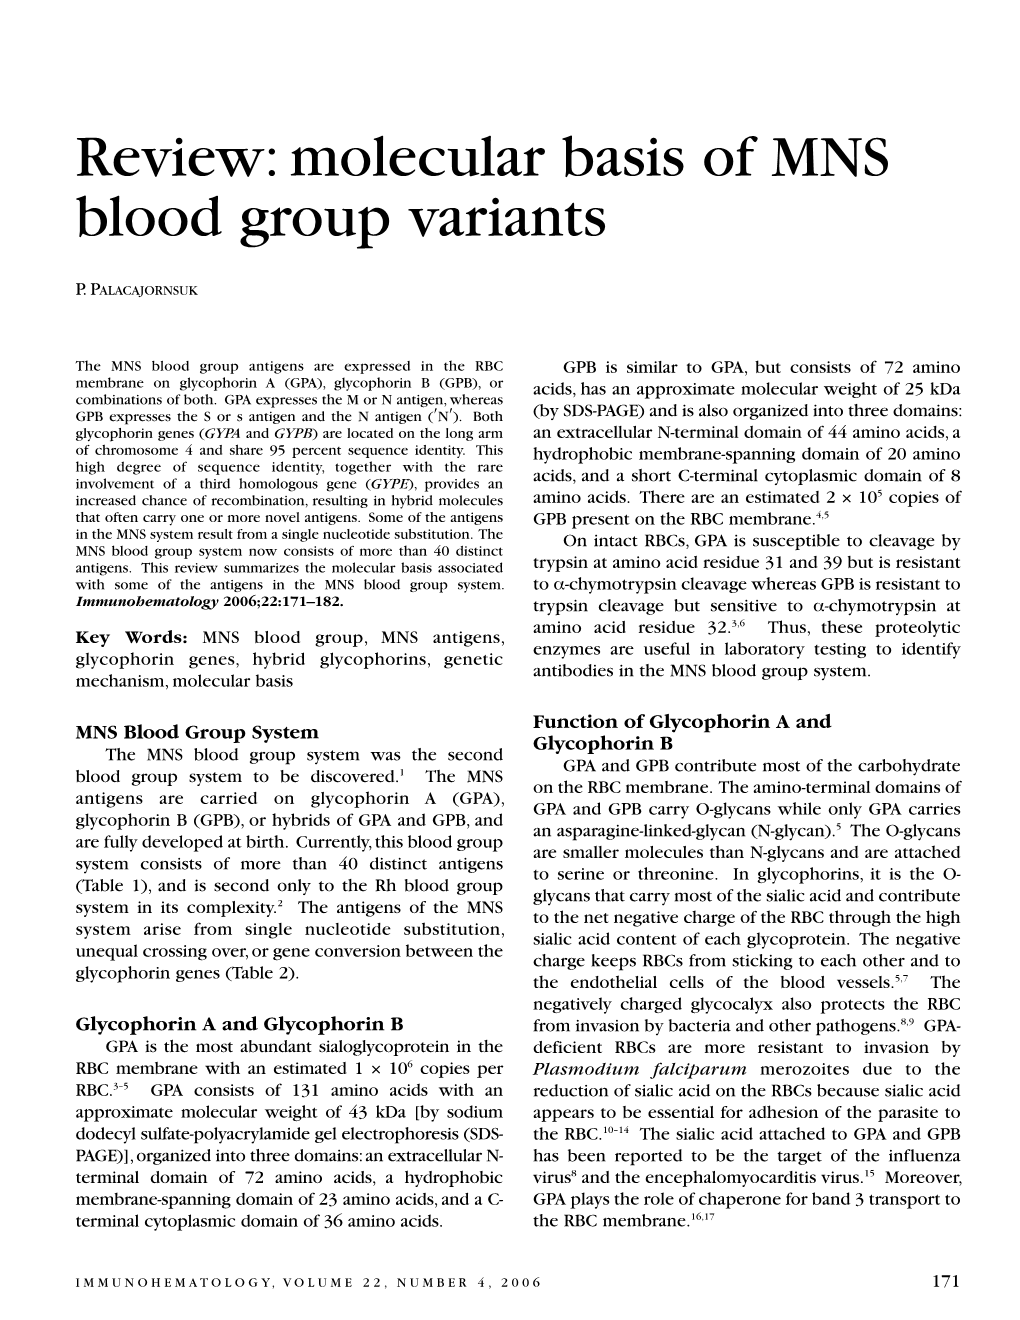 Review: Molecular Basis of MNS Blood Group Variants